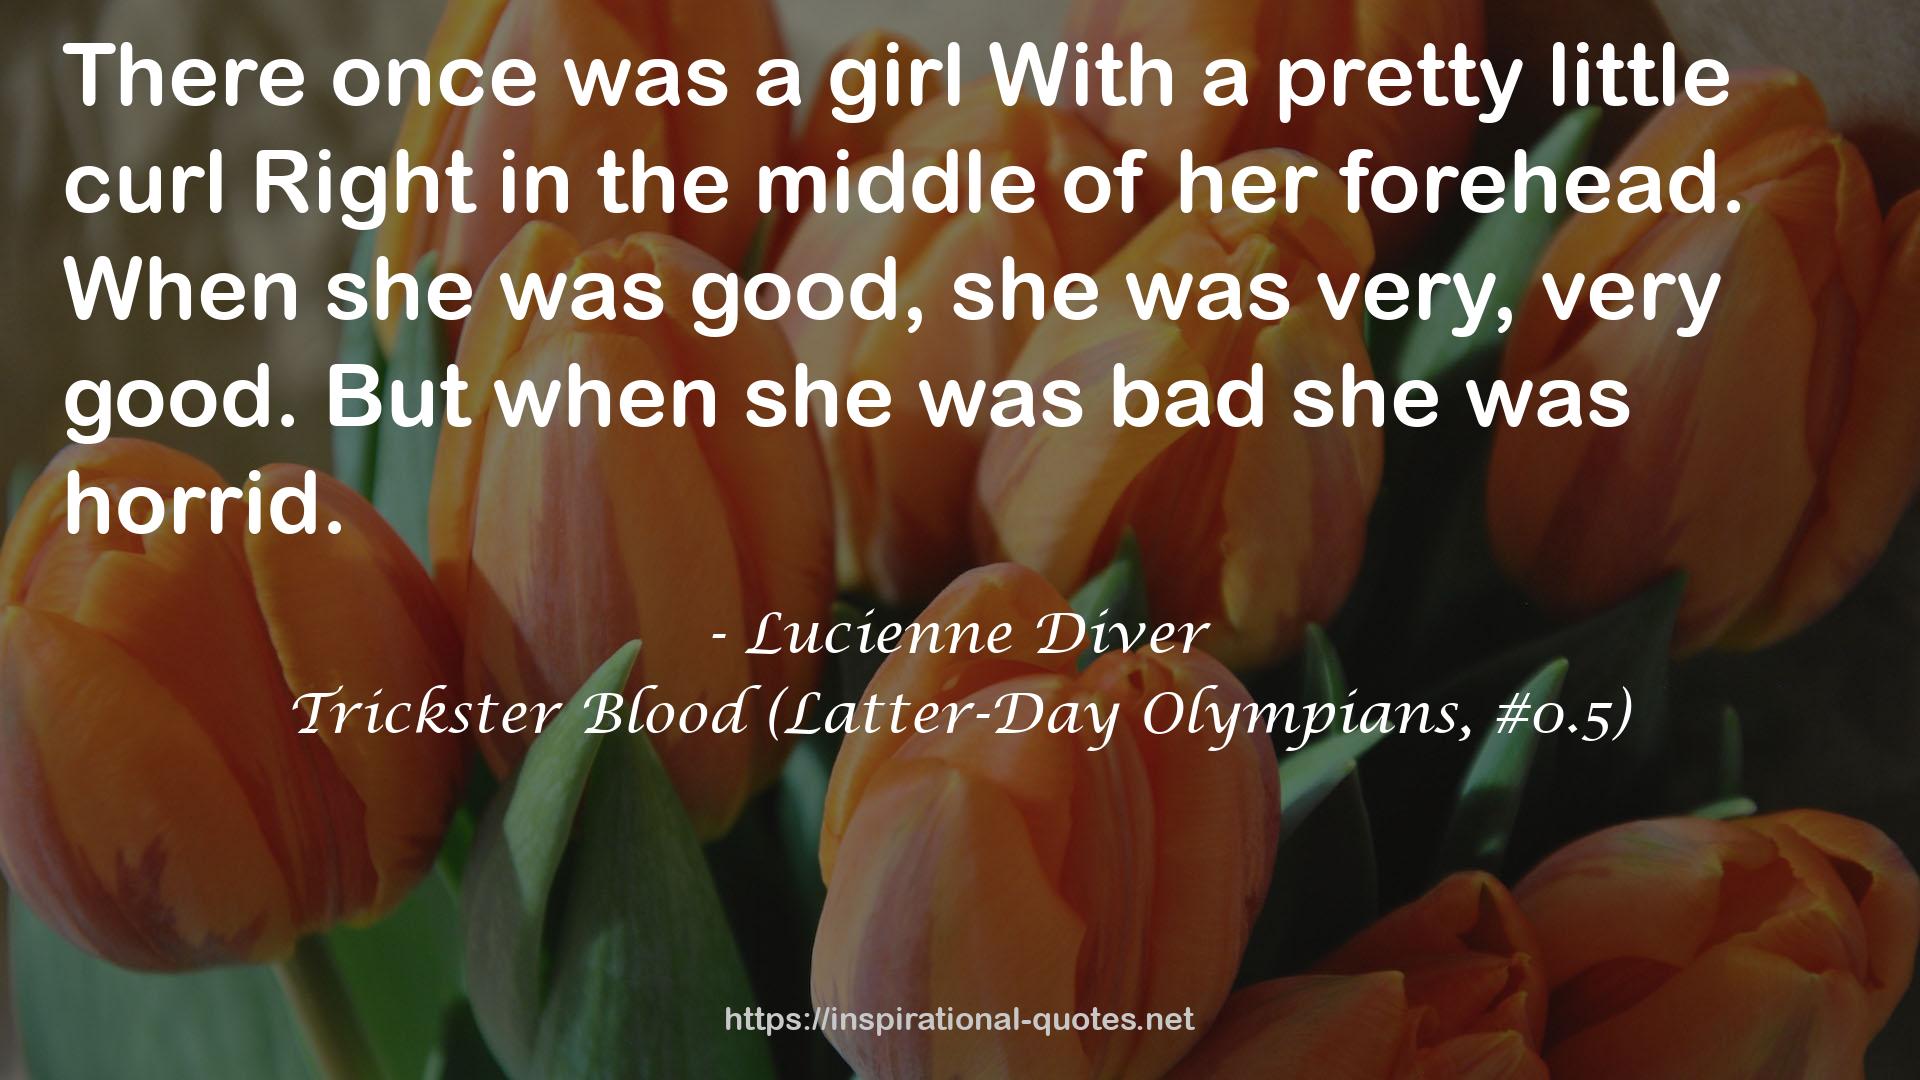 Trickster Blood (Latter-Day Olympians, #0.5) QUOTES